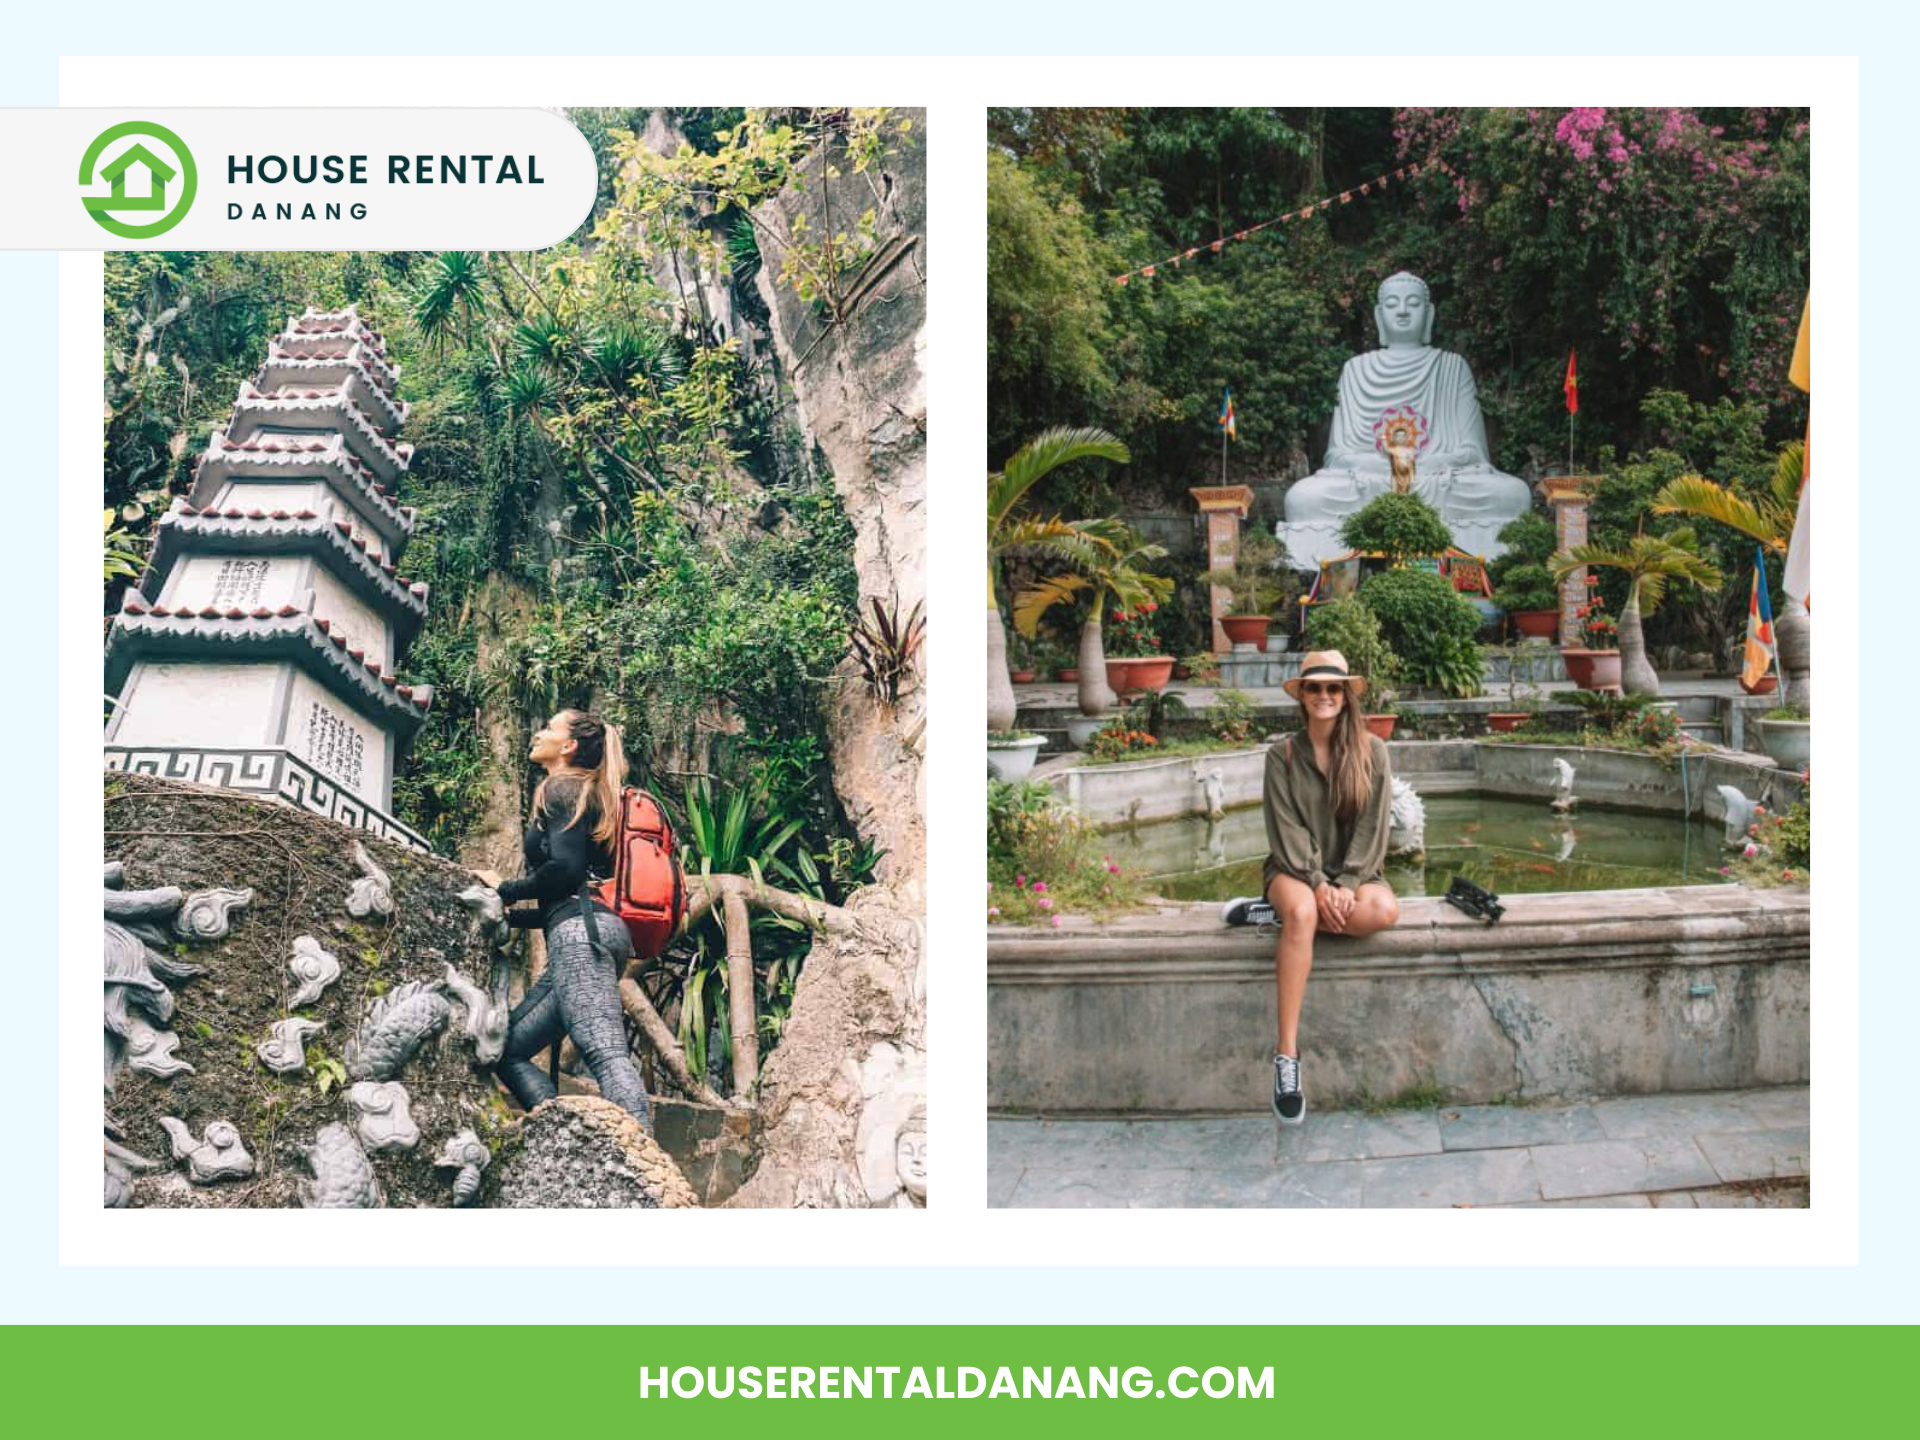 Two images: In the left image, a person with a backpack climbs stairs near the intricate structure of Marble Mountains Danang. In the right image, a person sits casually by a pond with a large Buddha statue in the background.